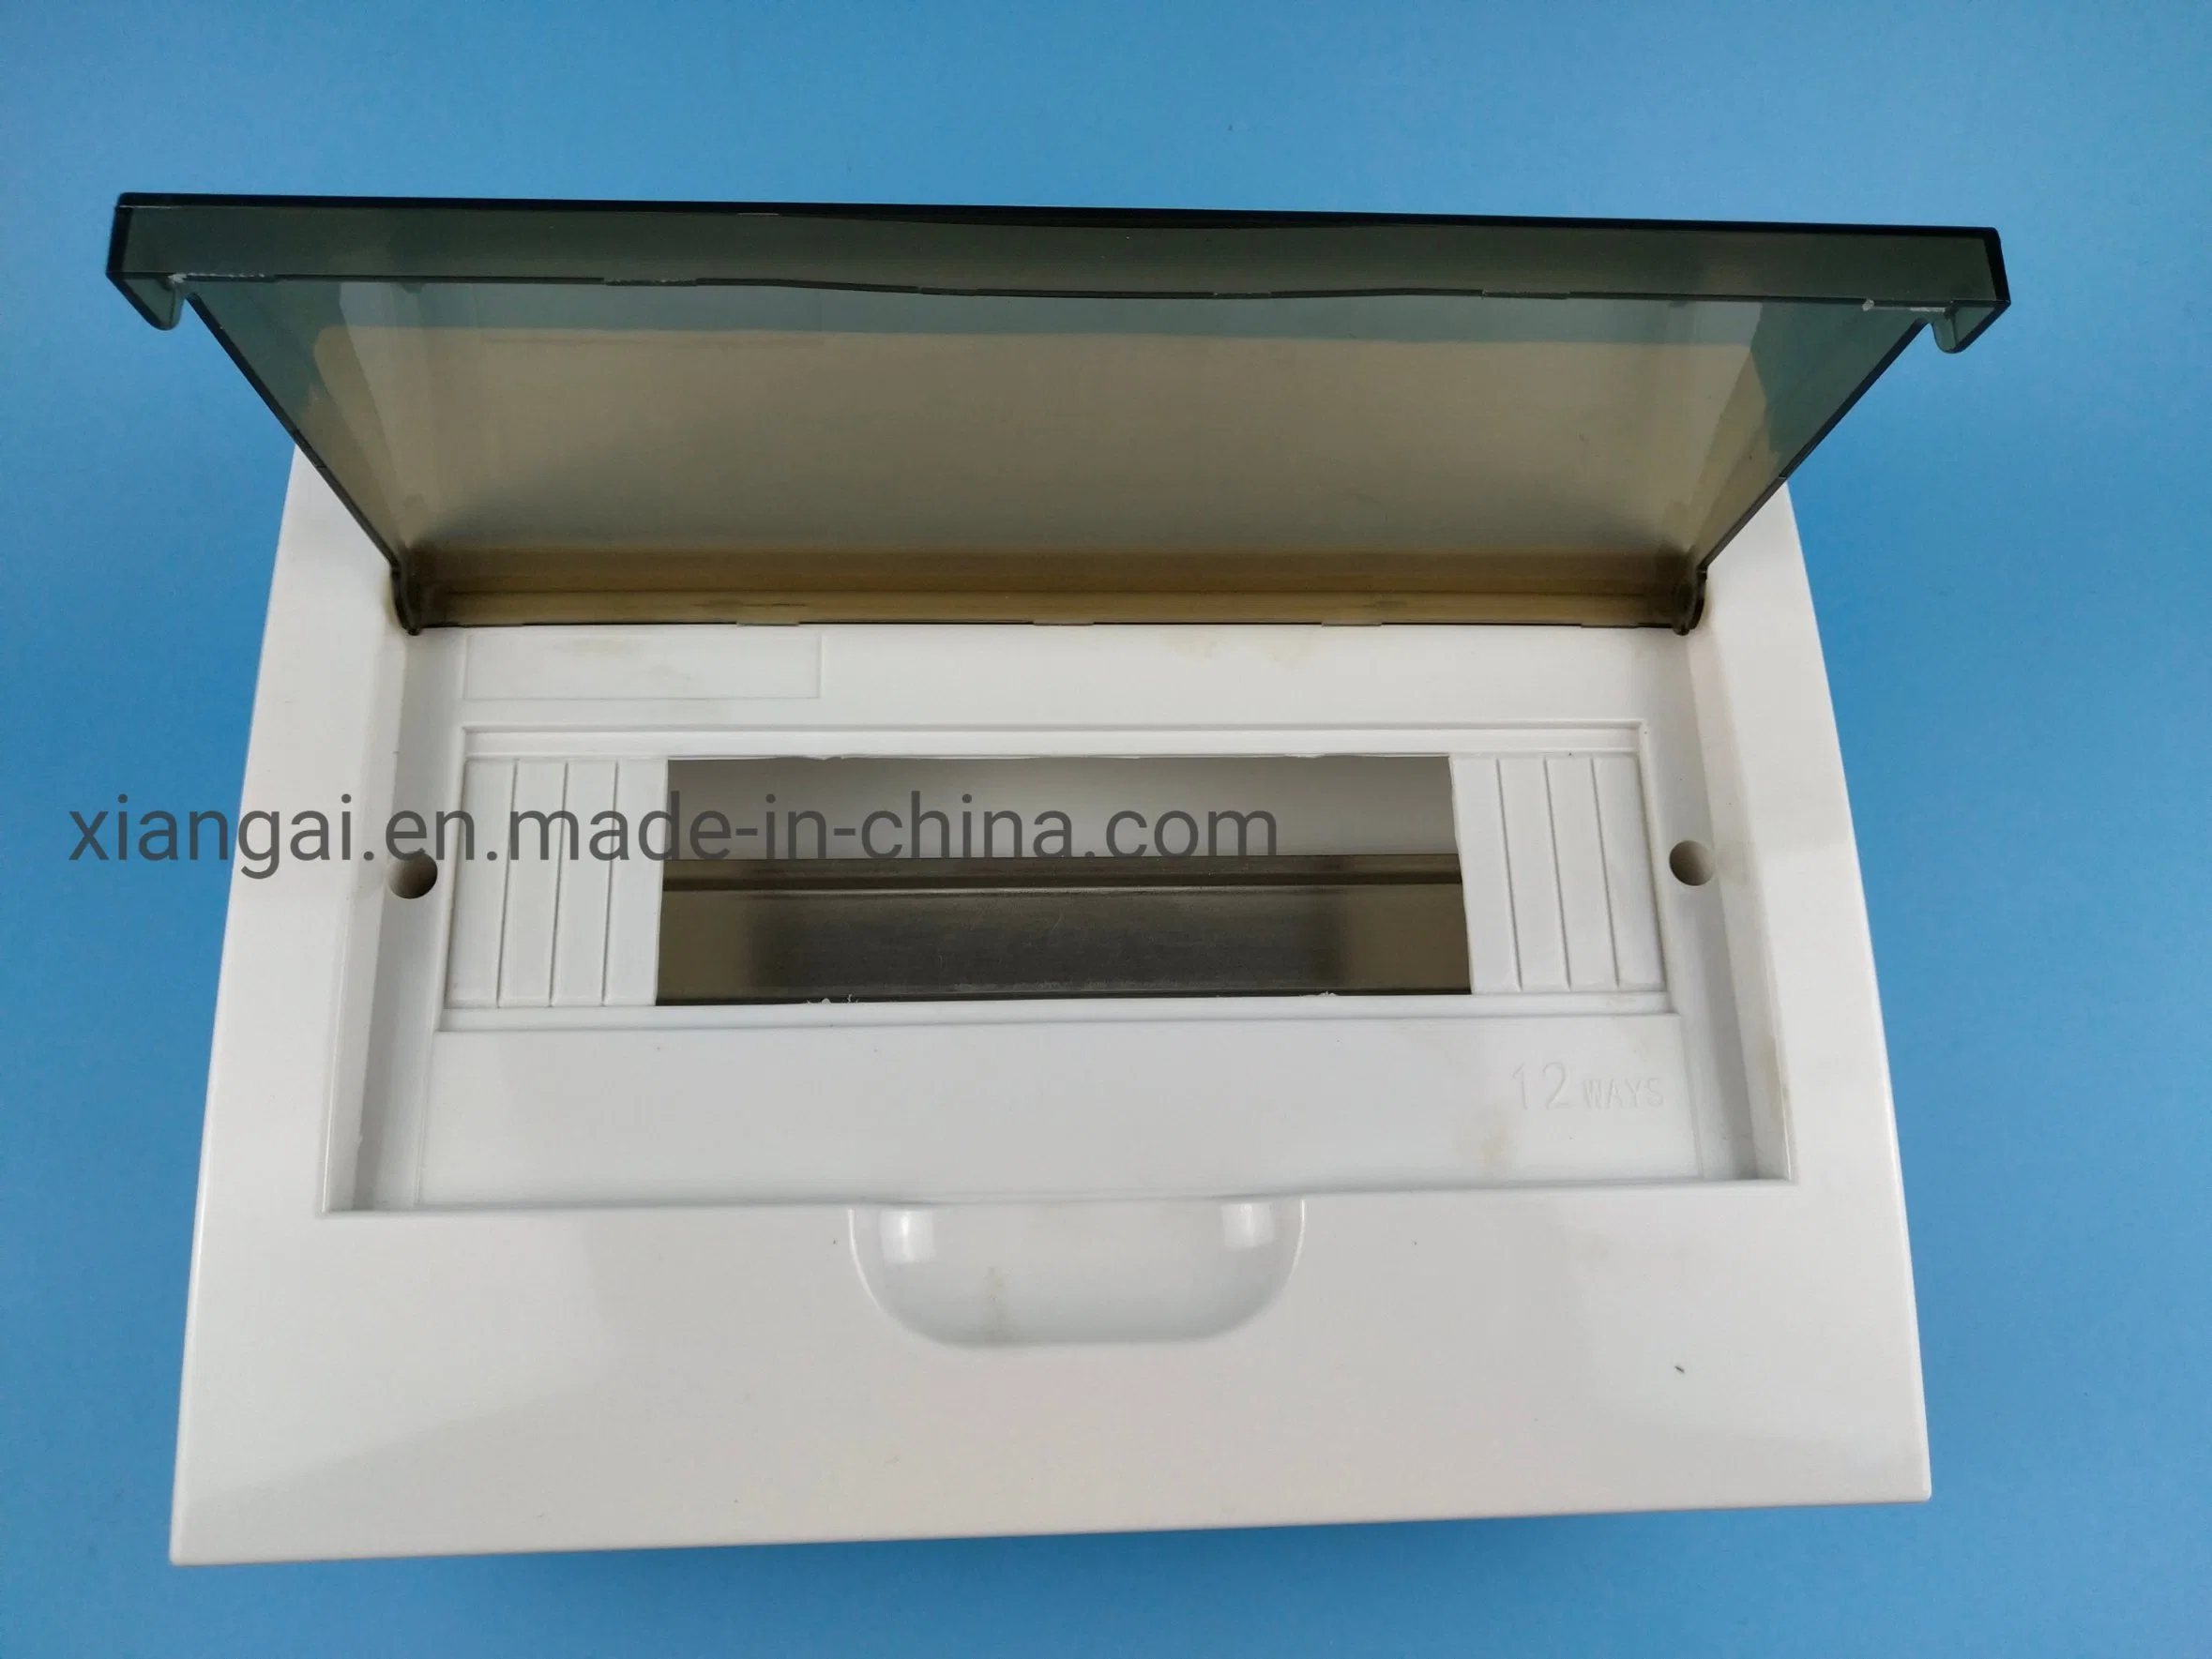 Wholesale Distribution Electrical Box MCB Control Board and Power Distribution Box Factory